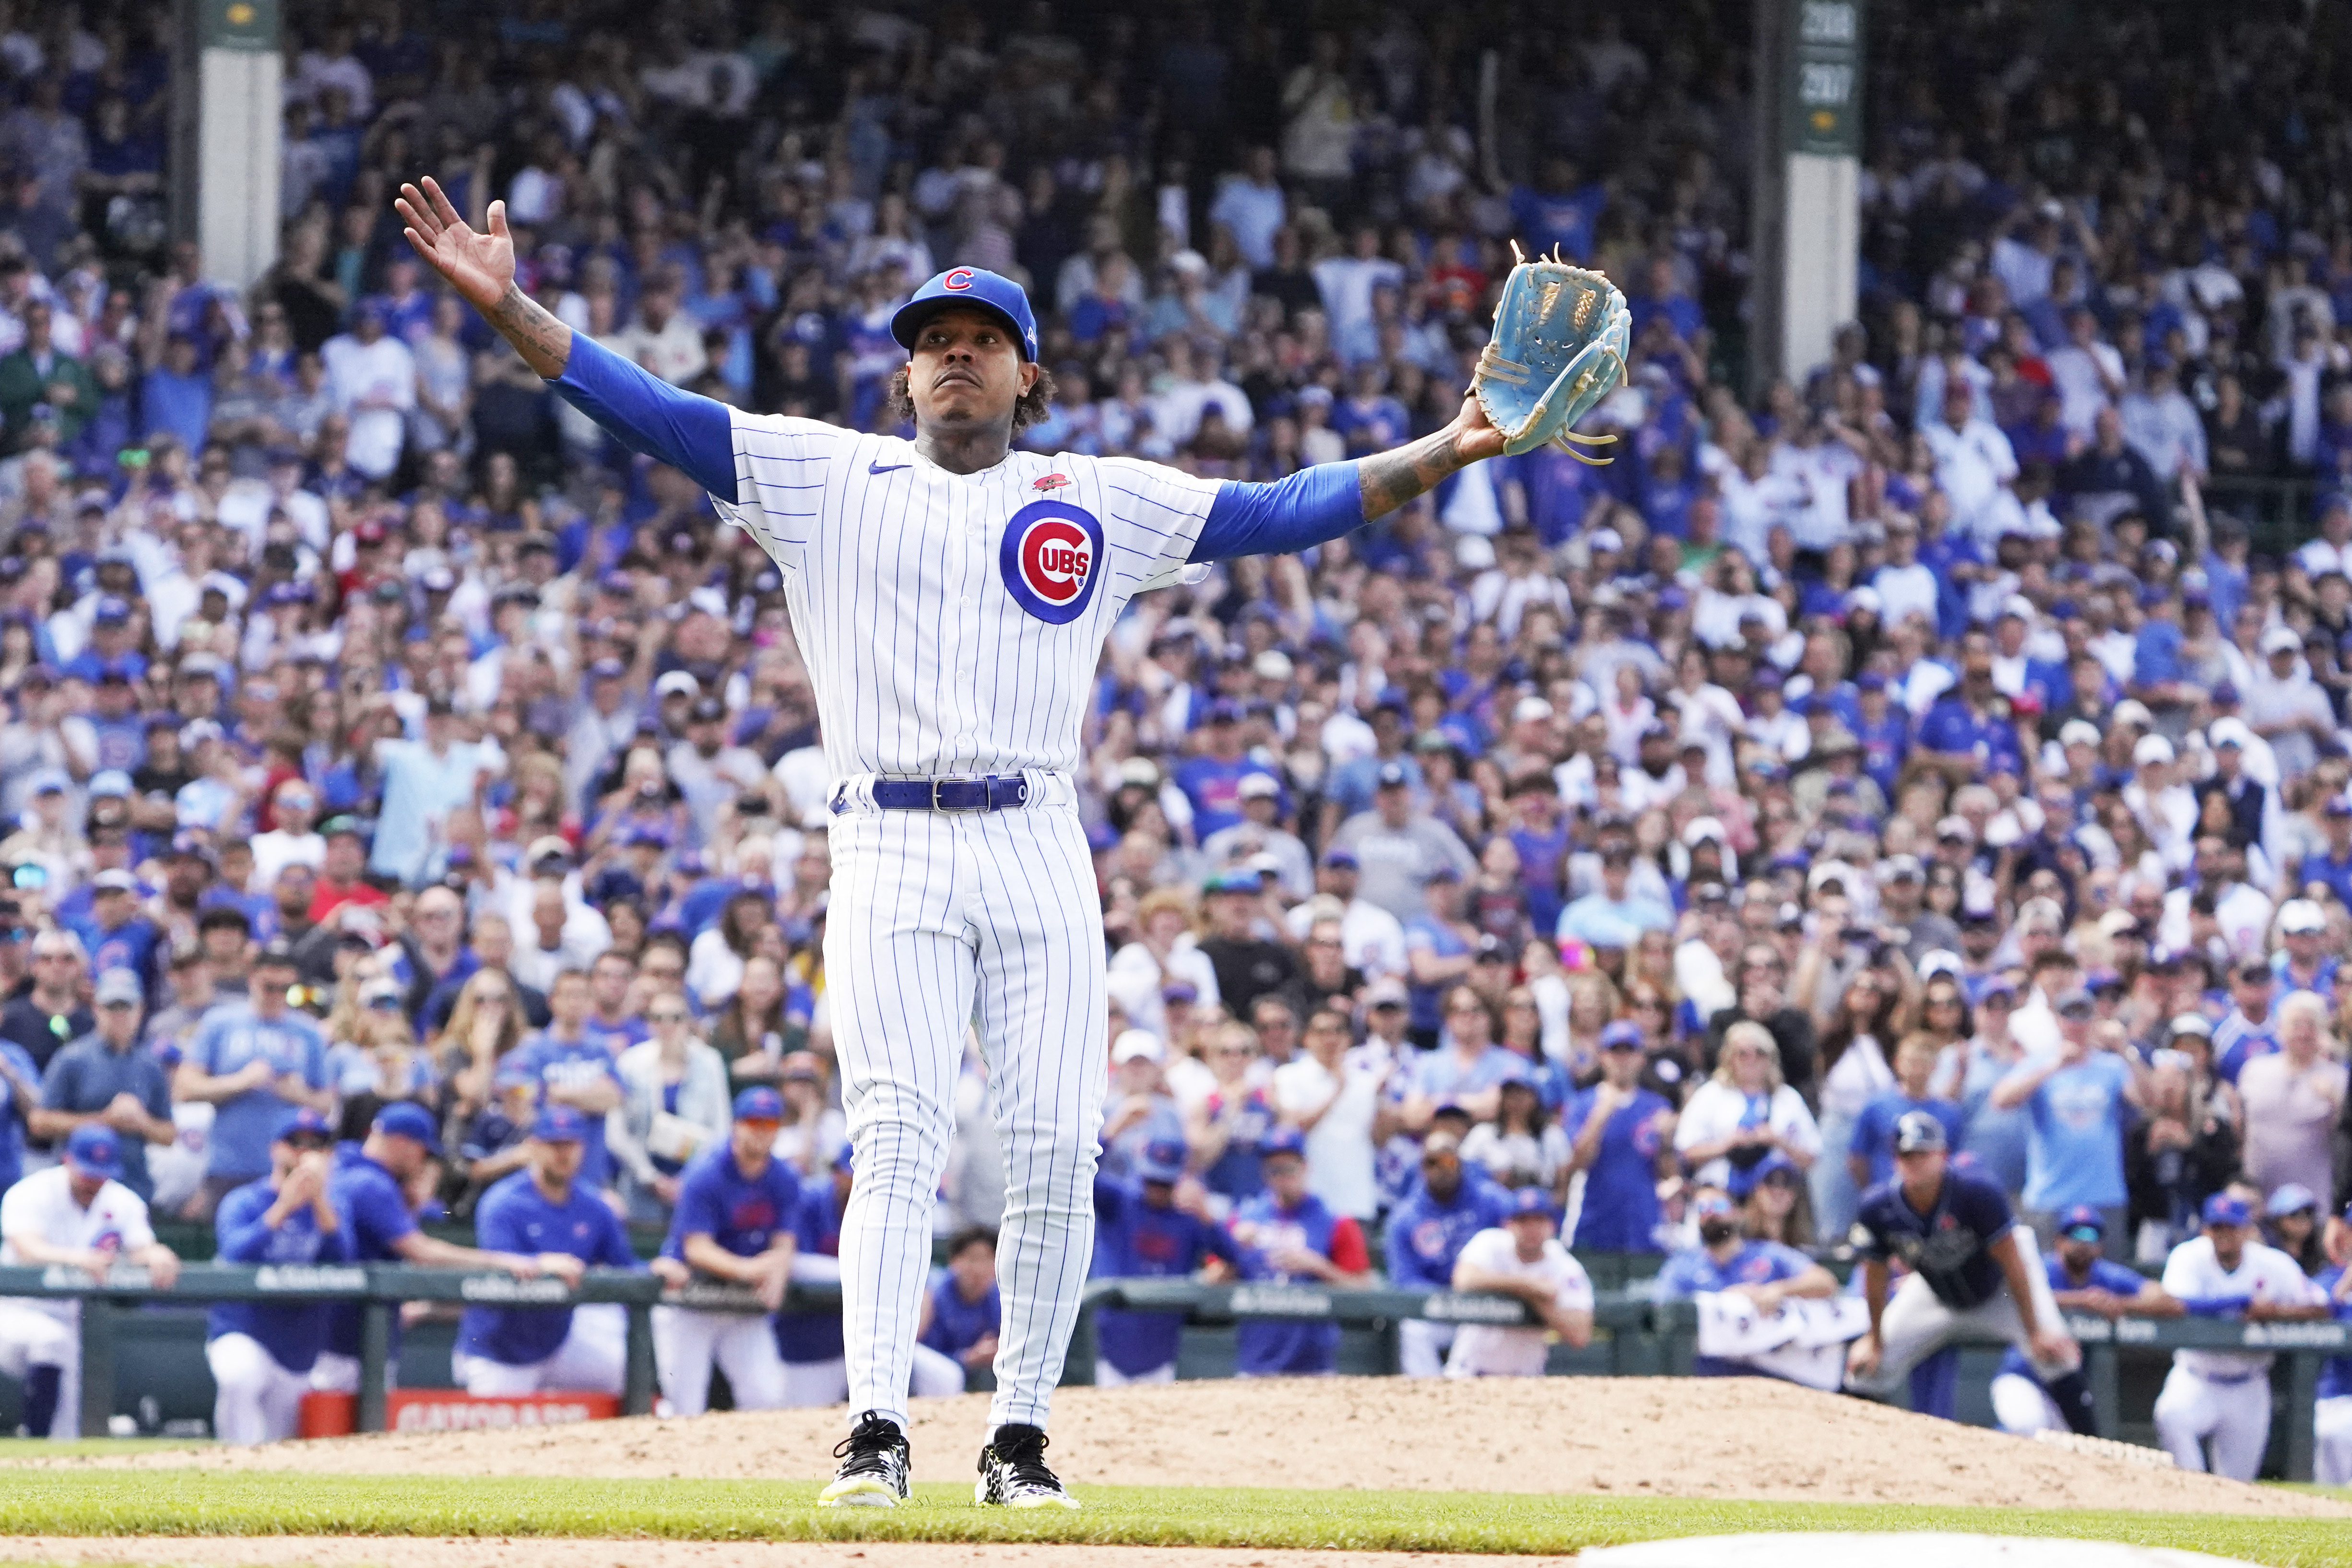 Cubs All Access  Behind the Scenes of Stroman's Stellar Season and Mervis'  Major League Debut 